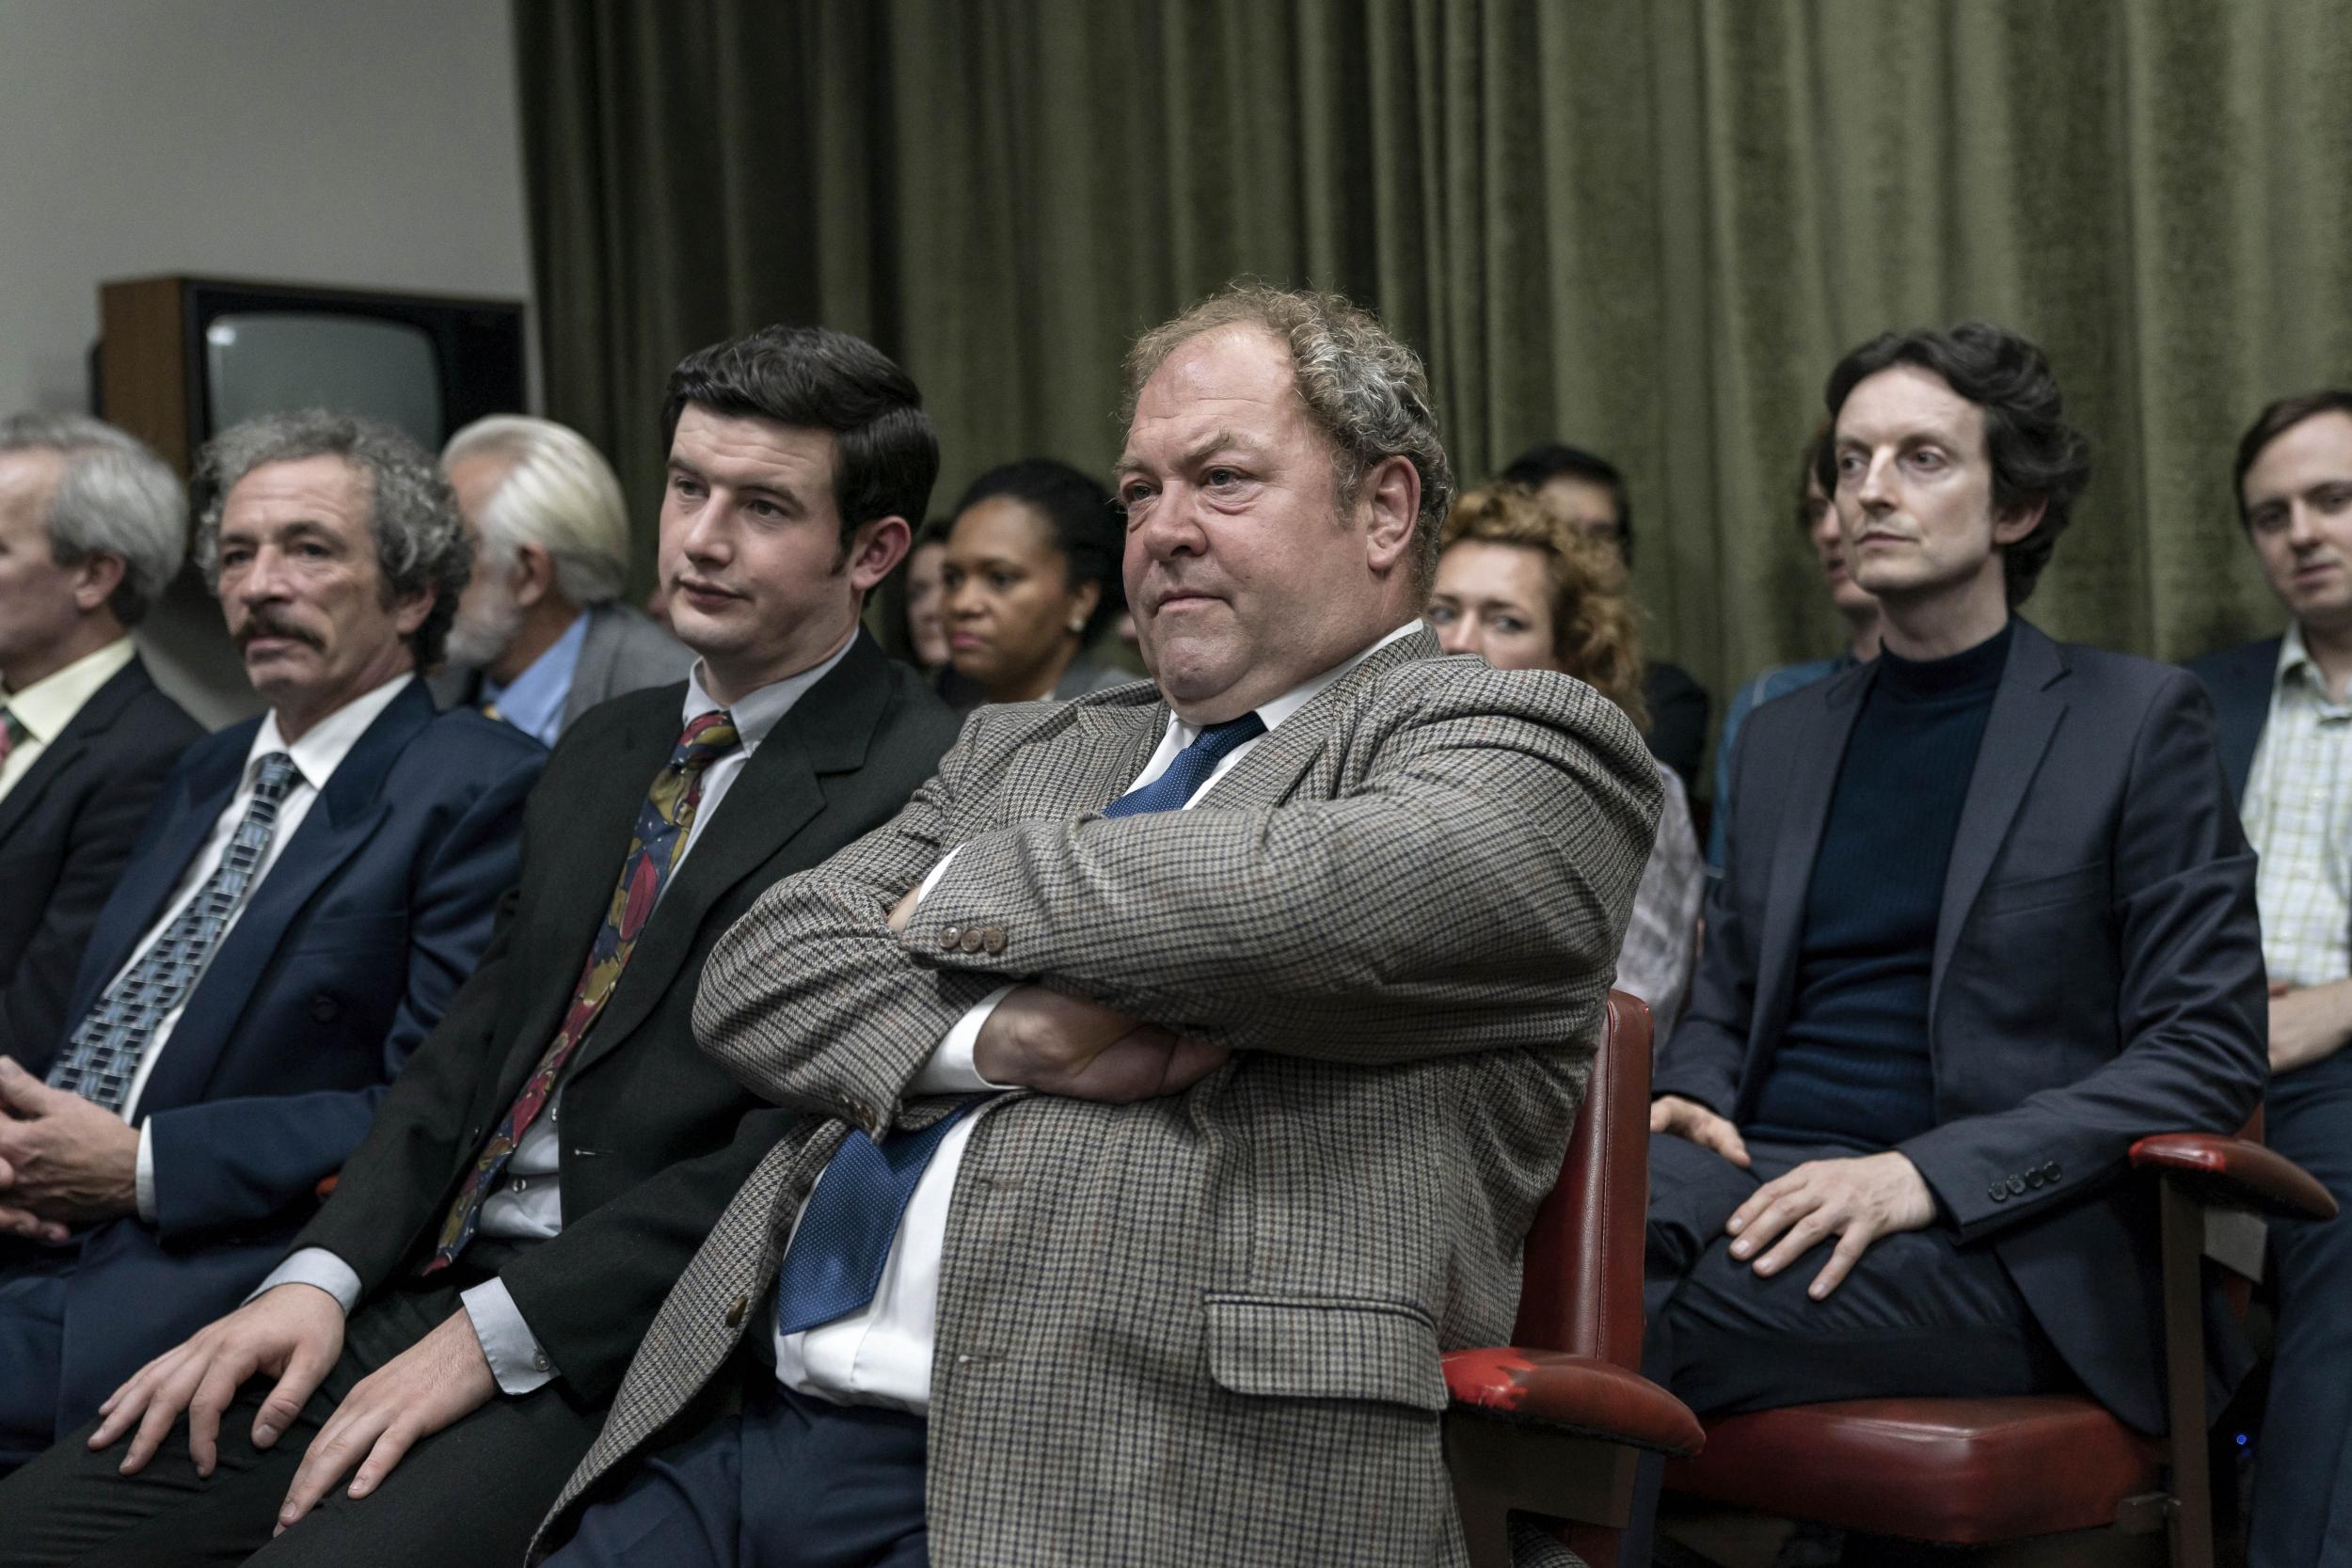 DS Stan Jones watches Jeremy Bamber trial in ITV drama White House Farm